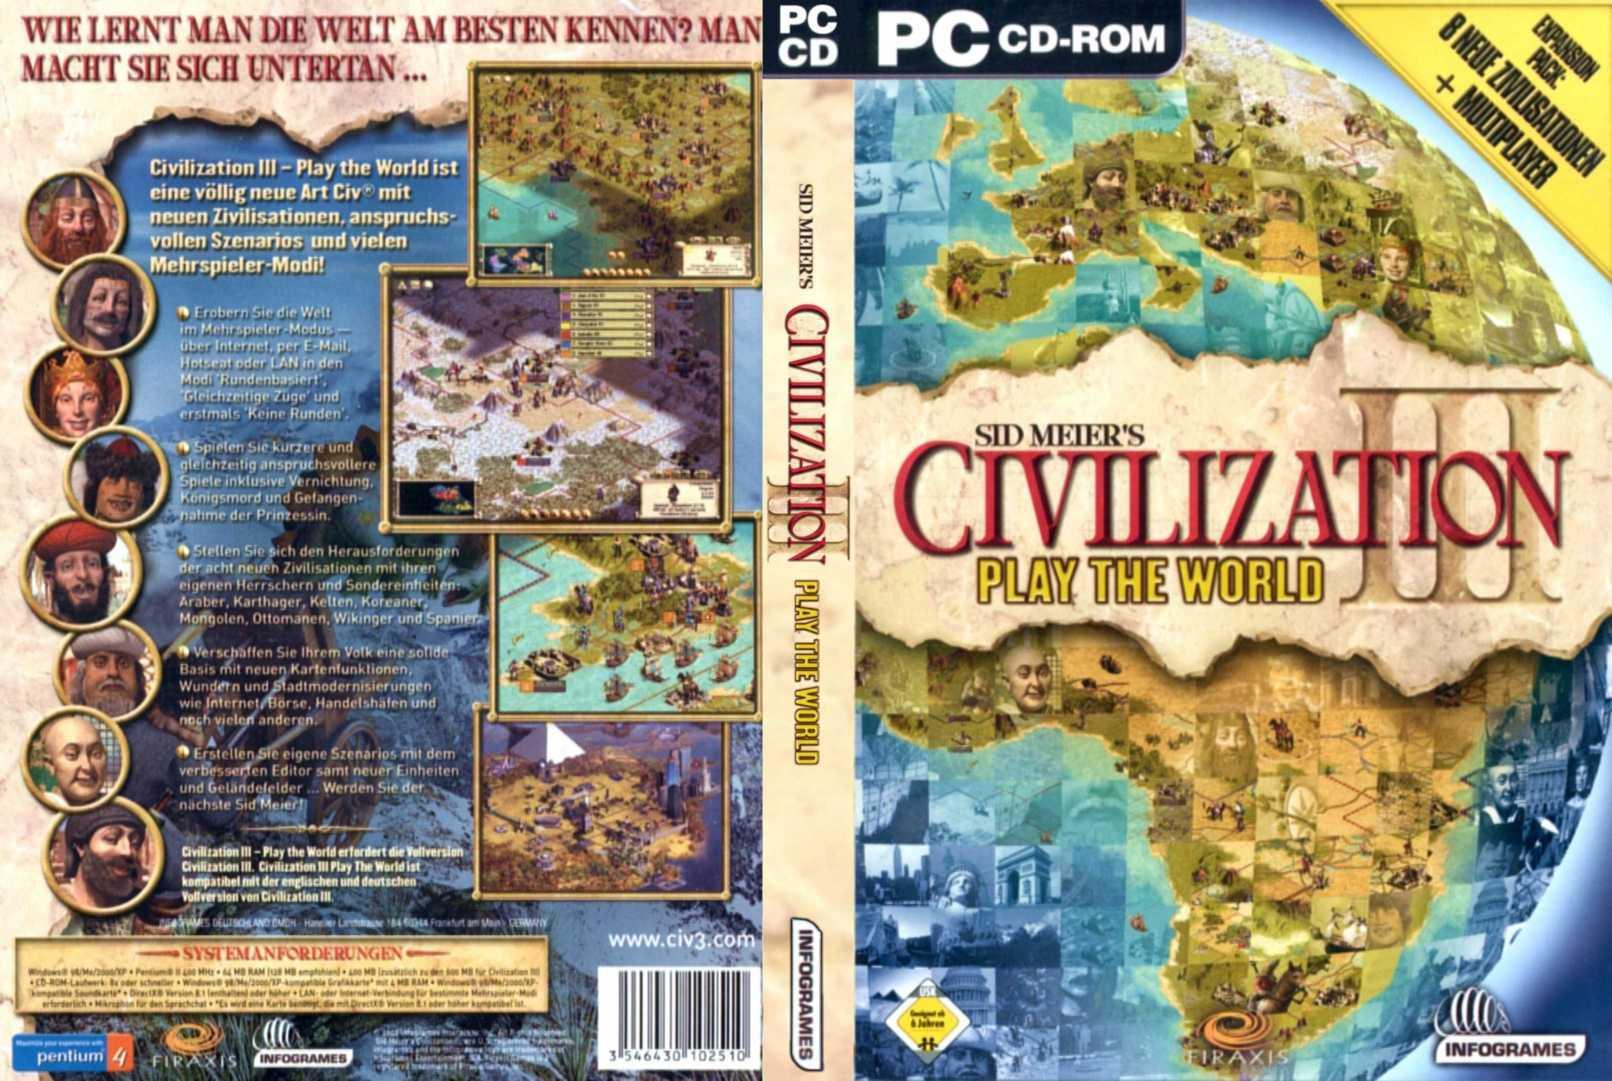 Civilization 3: Play the World - DVD obal